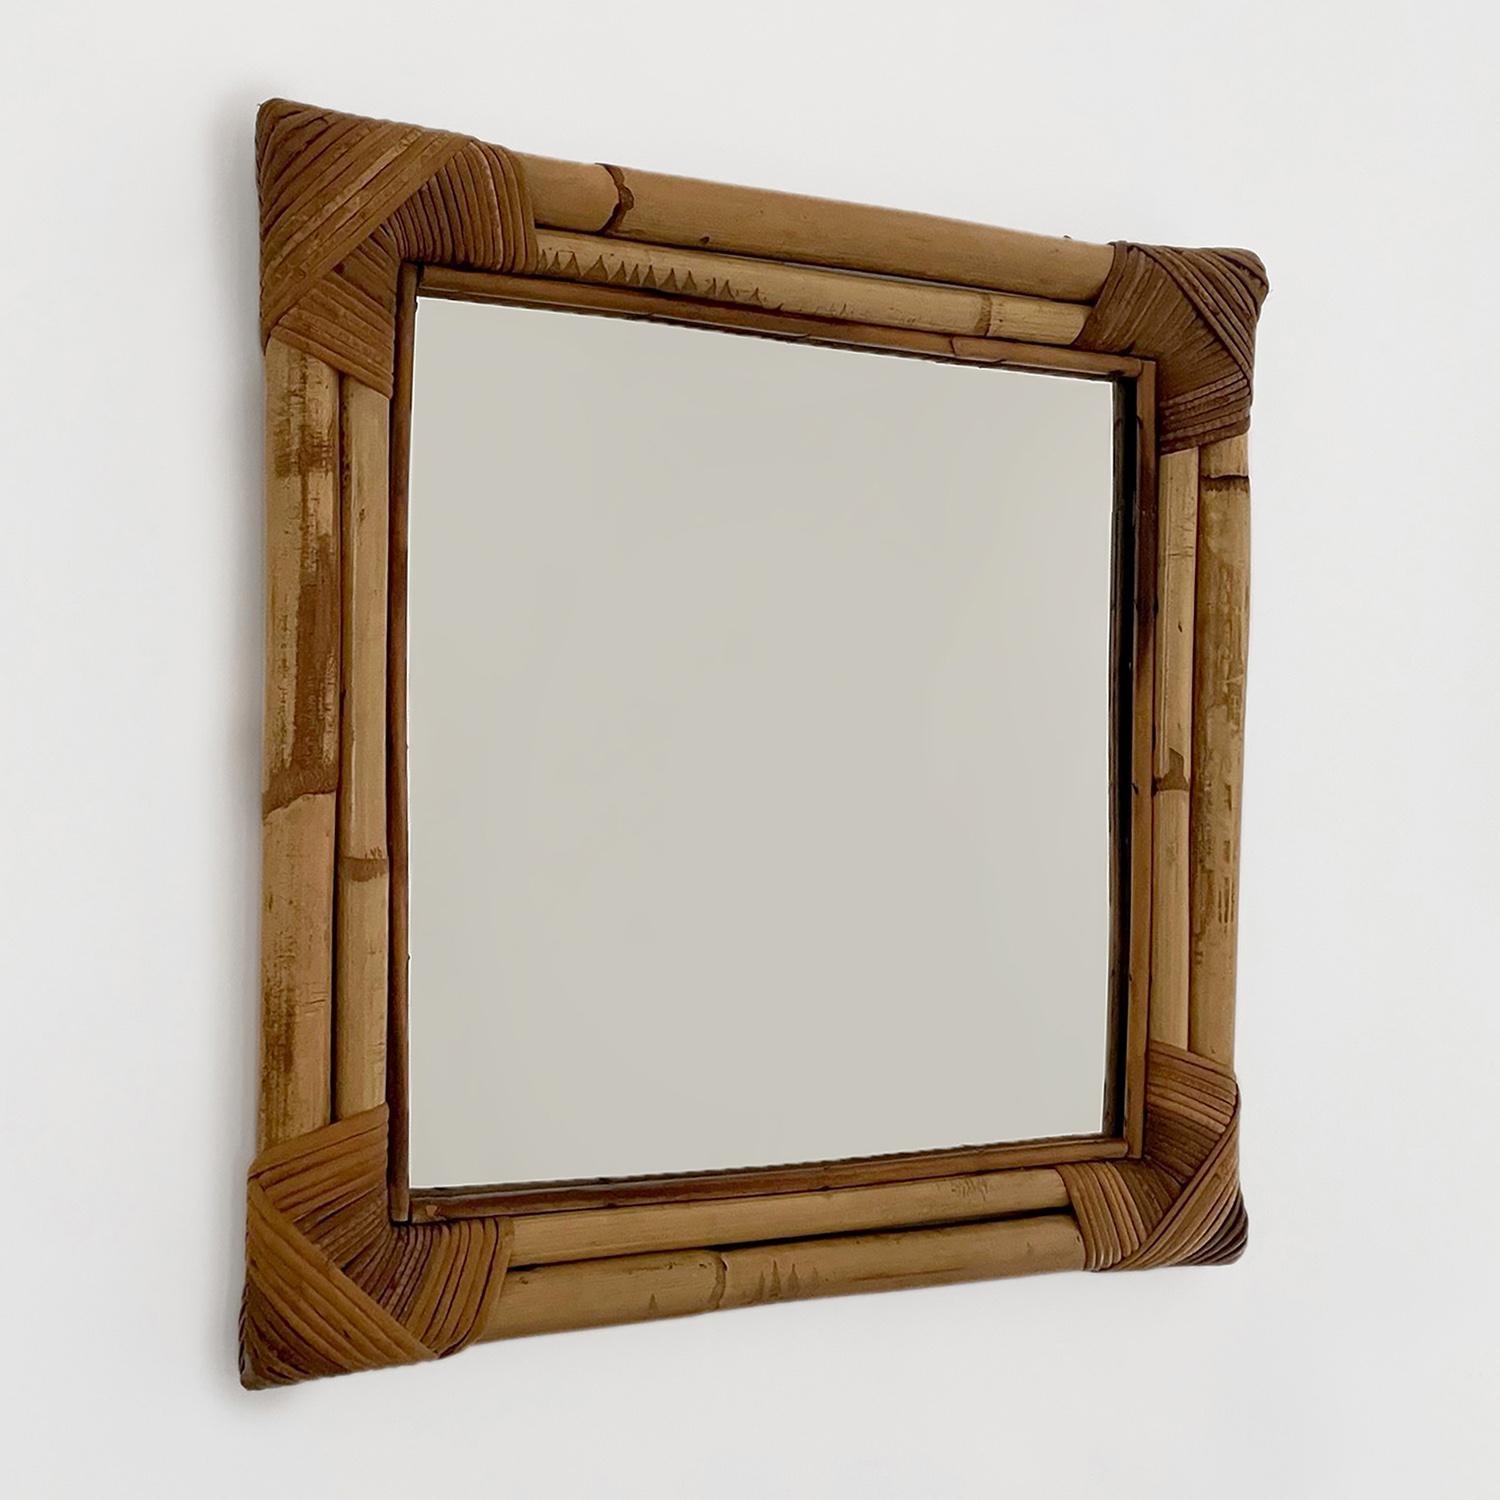 French bamboo & rattan square mirror
France, circa 1970’s
Bamboo framed mirror with woven rattan corners
Organic composition & feel
Naturally occurring patterns and color variations throughout
Original mirror may have light markings
Patina from age